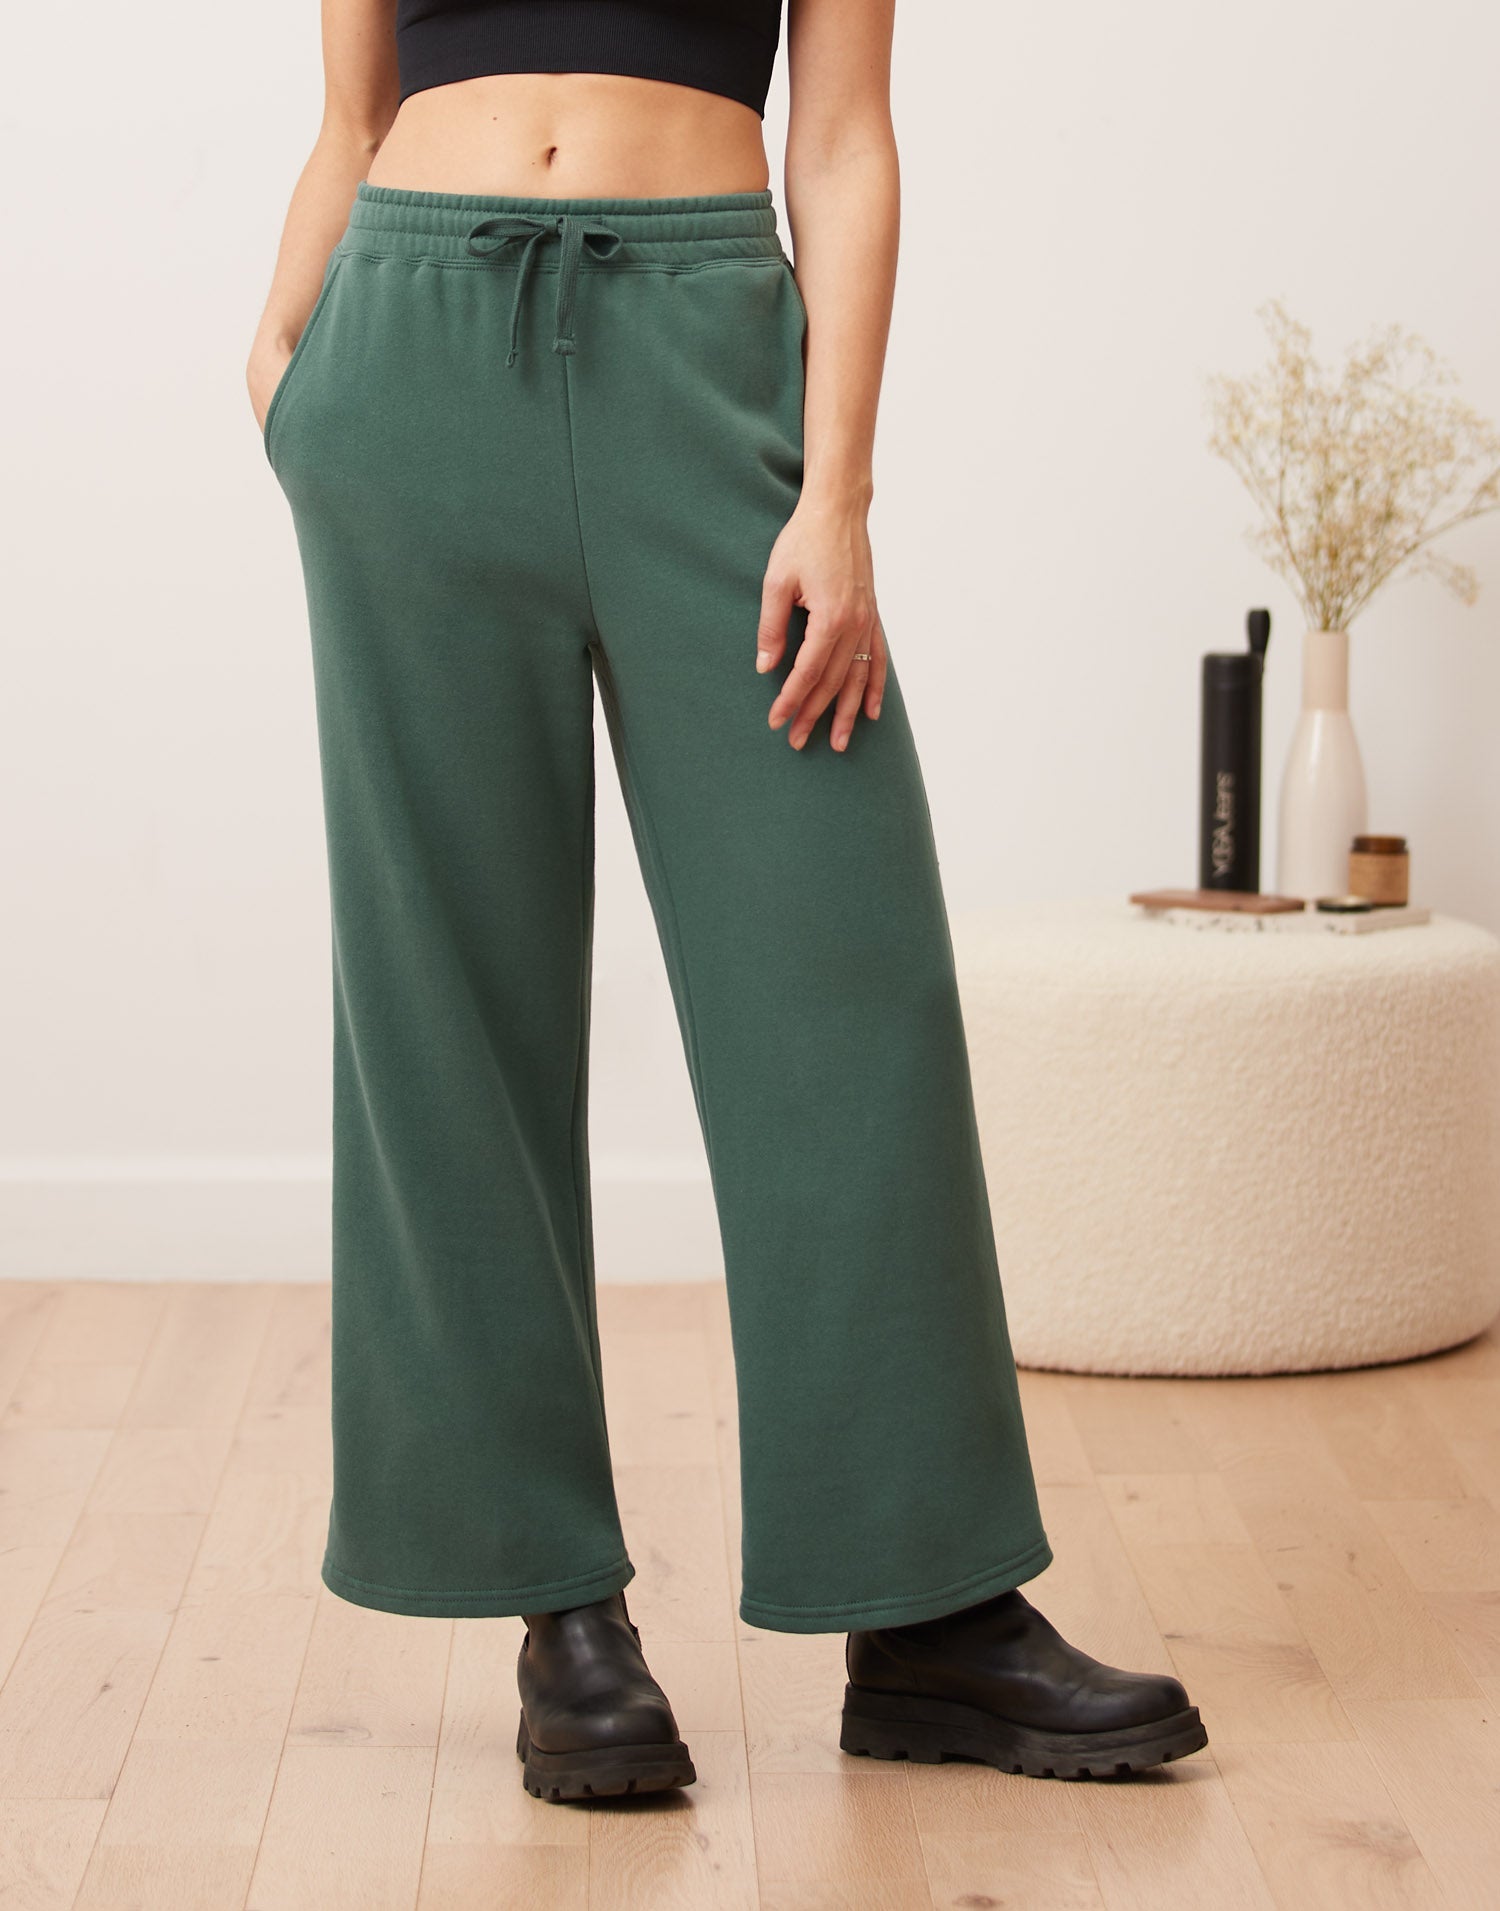 We're Spending The Rest Of Winter Wearing Wide-Leg Lounge Pants